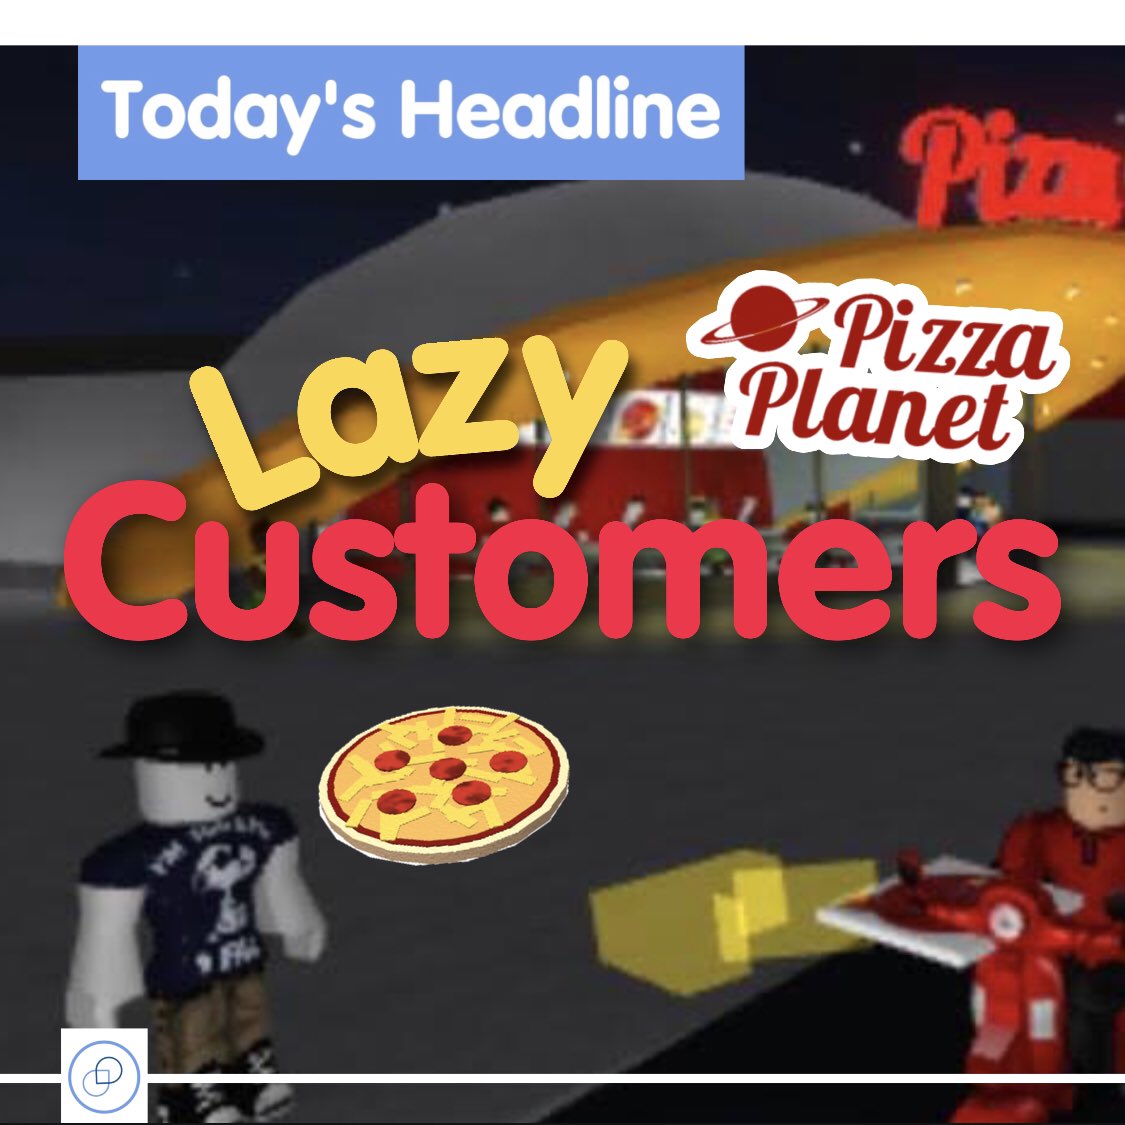 Bloxburg Headlines Roblox On Twitter Although We All Of Course Enjoy It When Our Pizza Planet Costumers Are Across The Road Do You Think That S Too Close Tell Us Your Thoughts Below - roblox bloxburg pizza planet